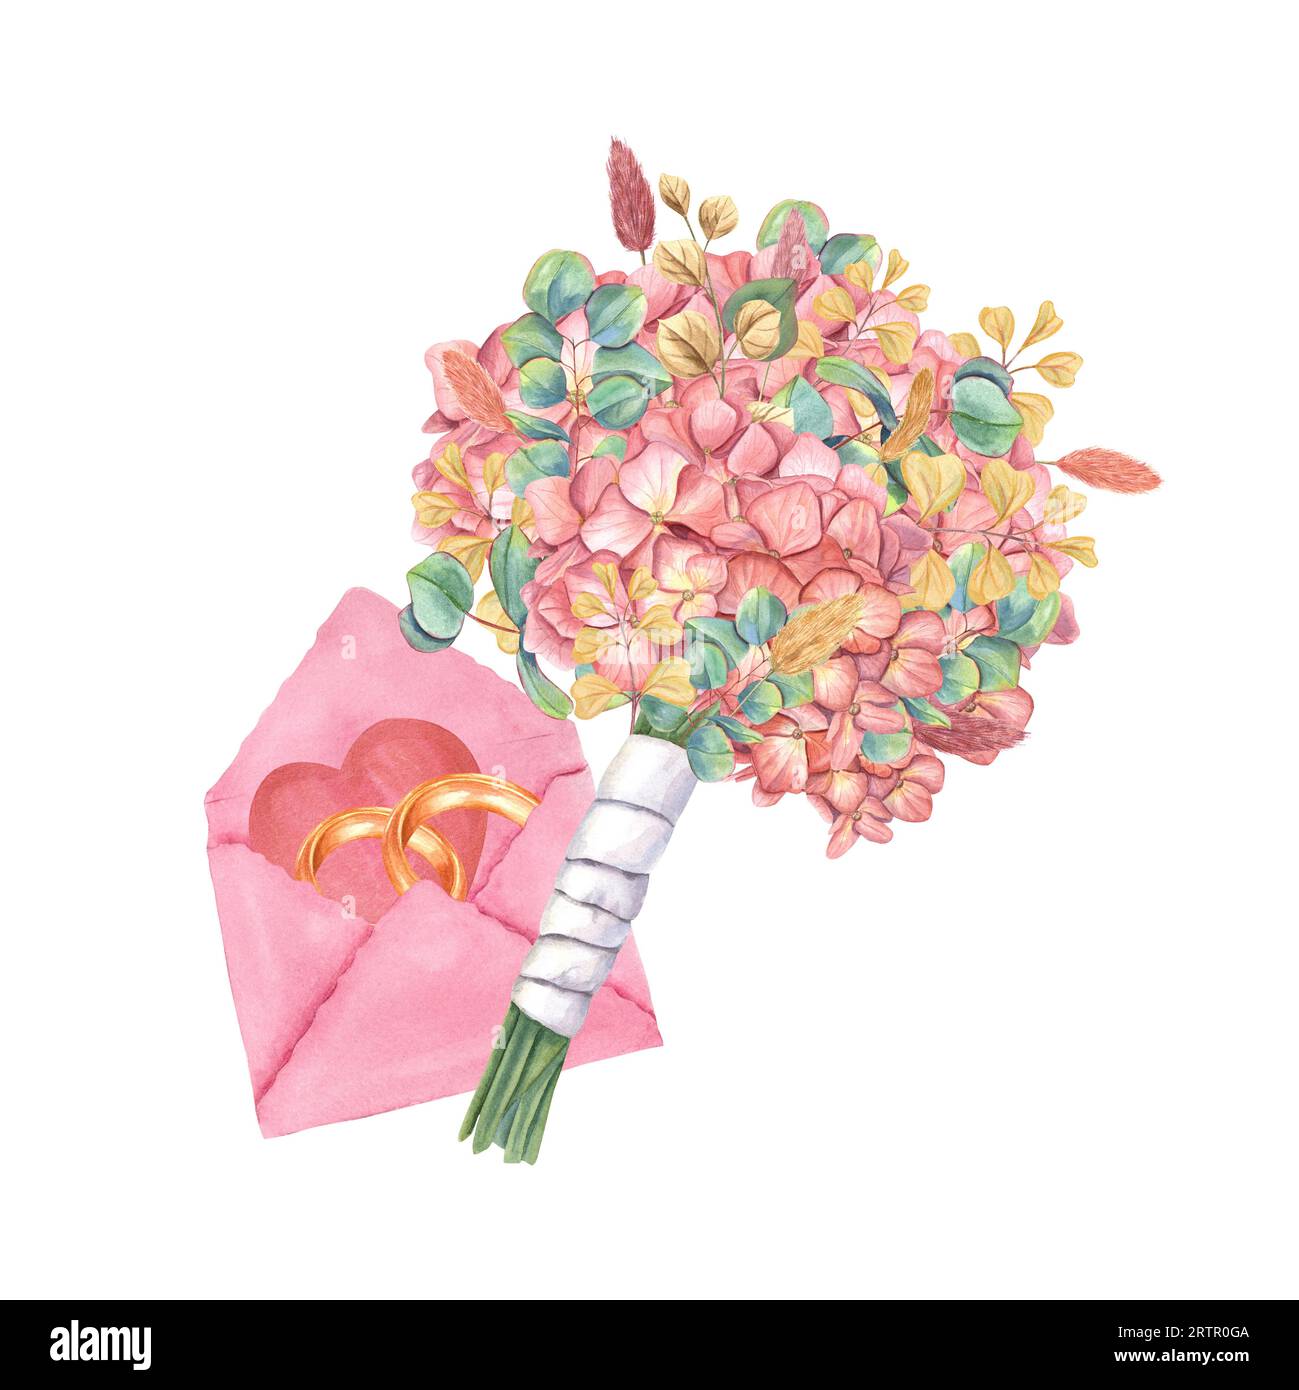 Bridal bouquet and pink envelope with gold rings and heart. Composition of hydrangea, eucalyptus, lagurus with white satin ribbon. Stock Photo